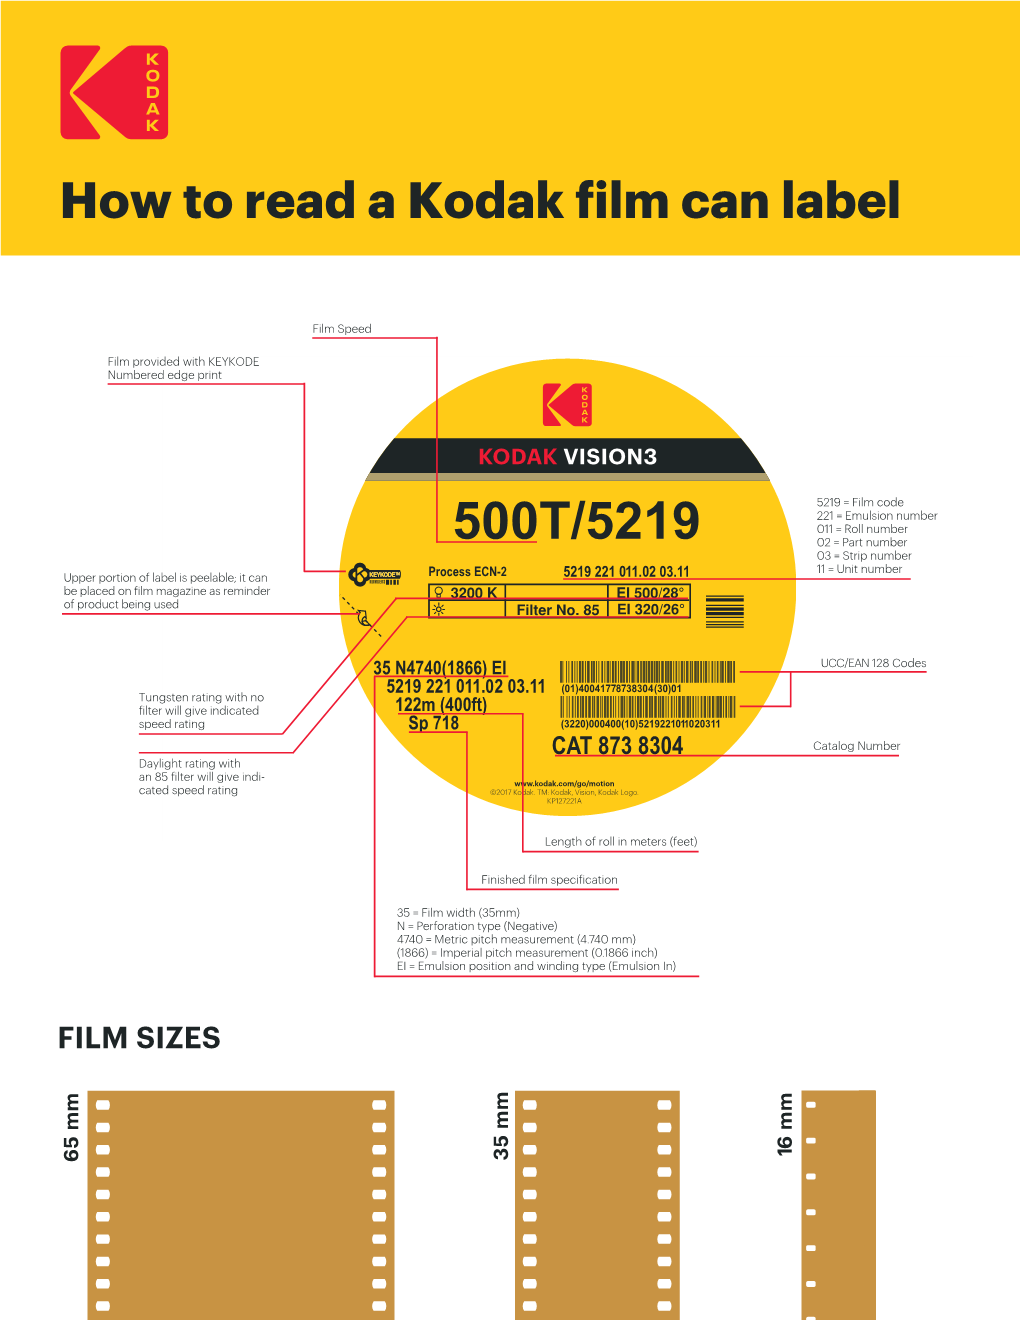 H20 How to Read a Film Label 180112.Indd